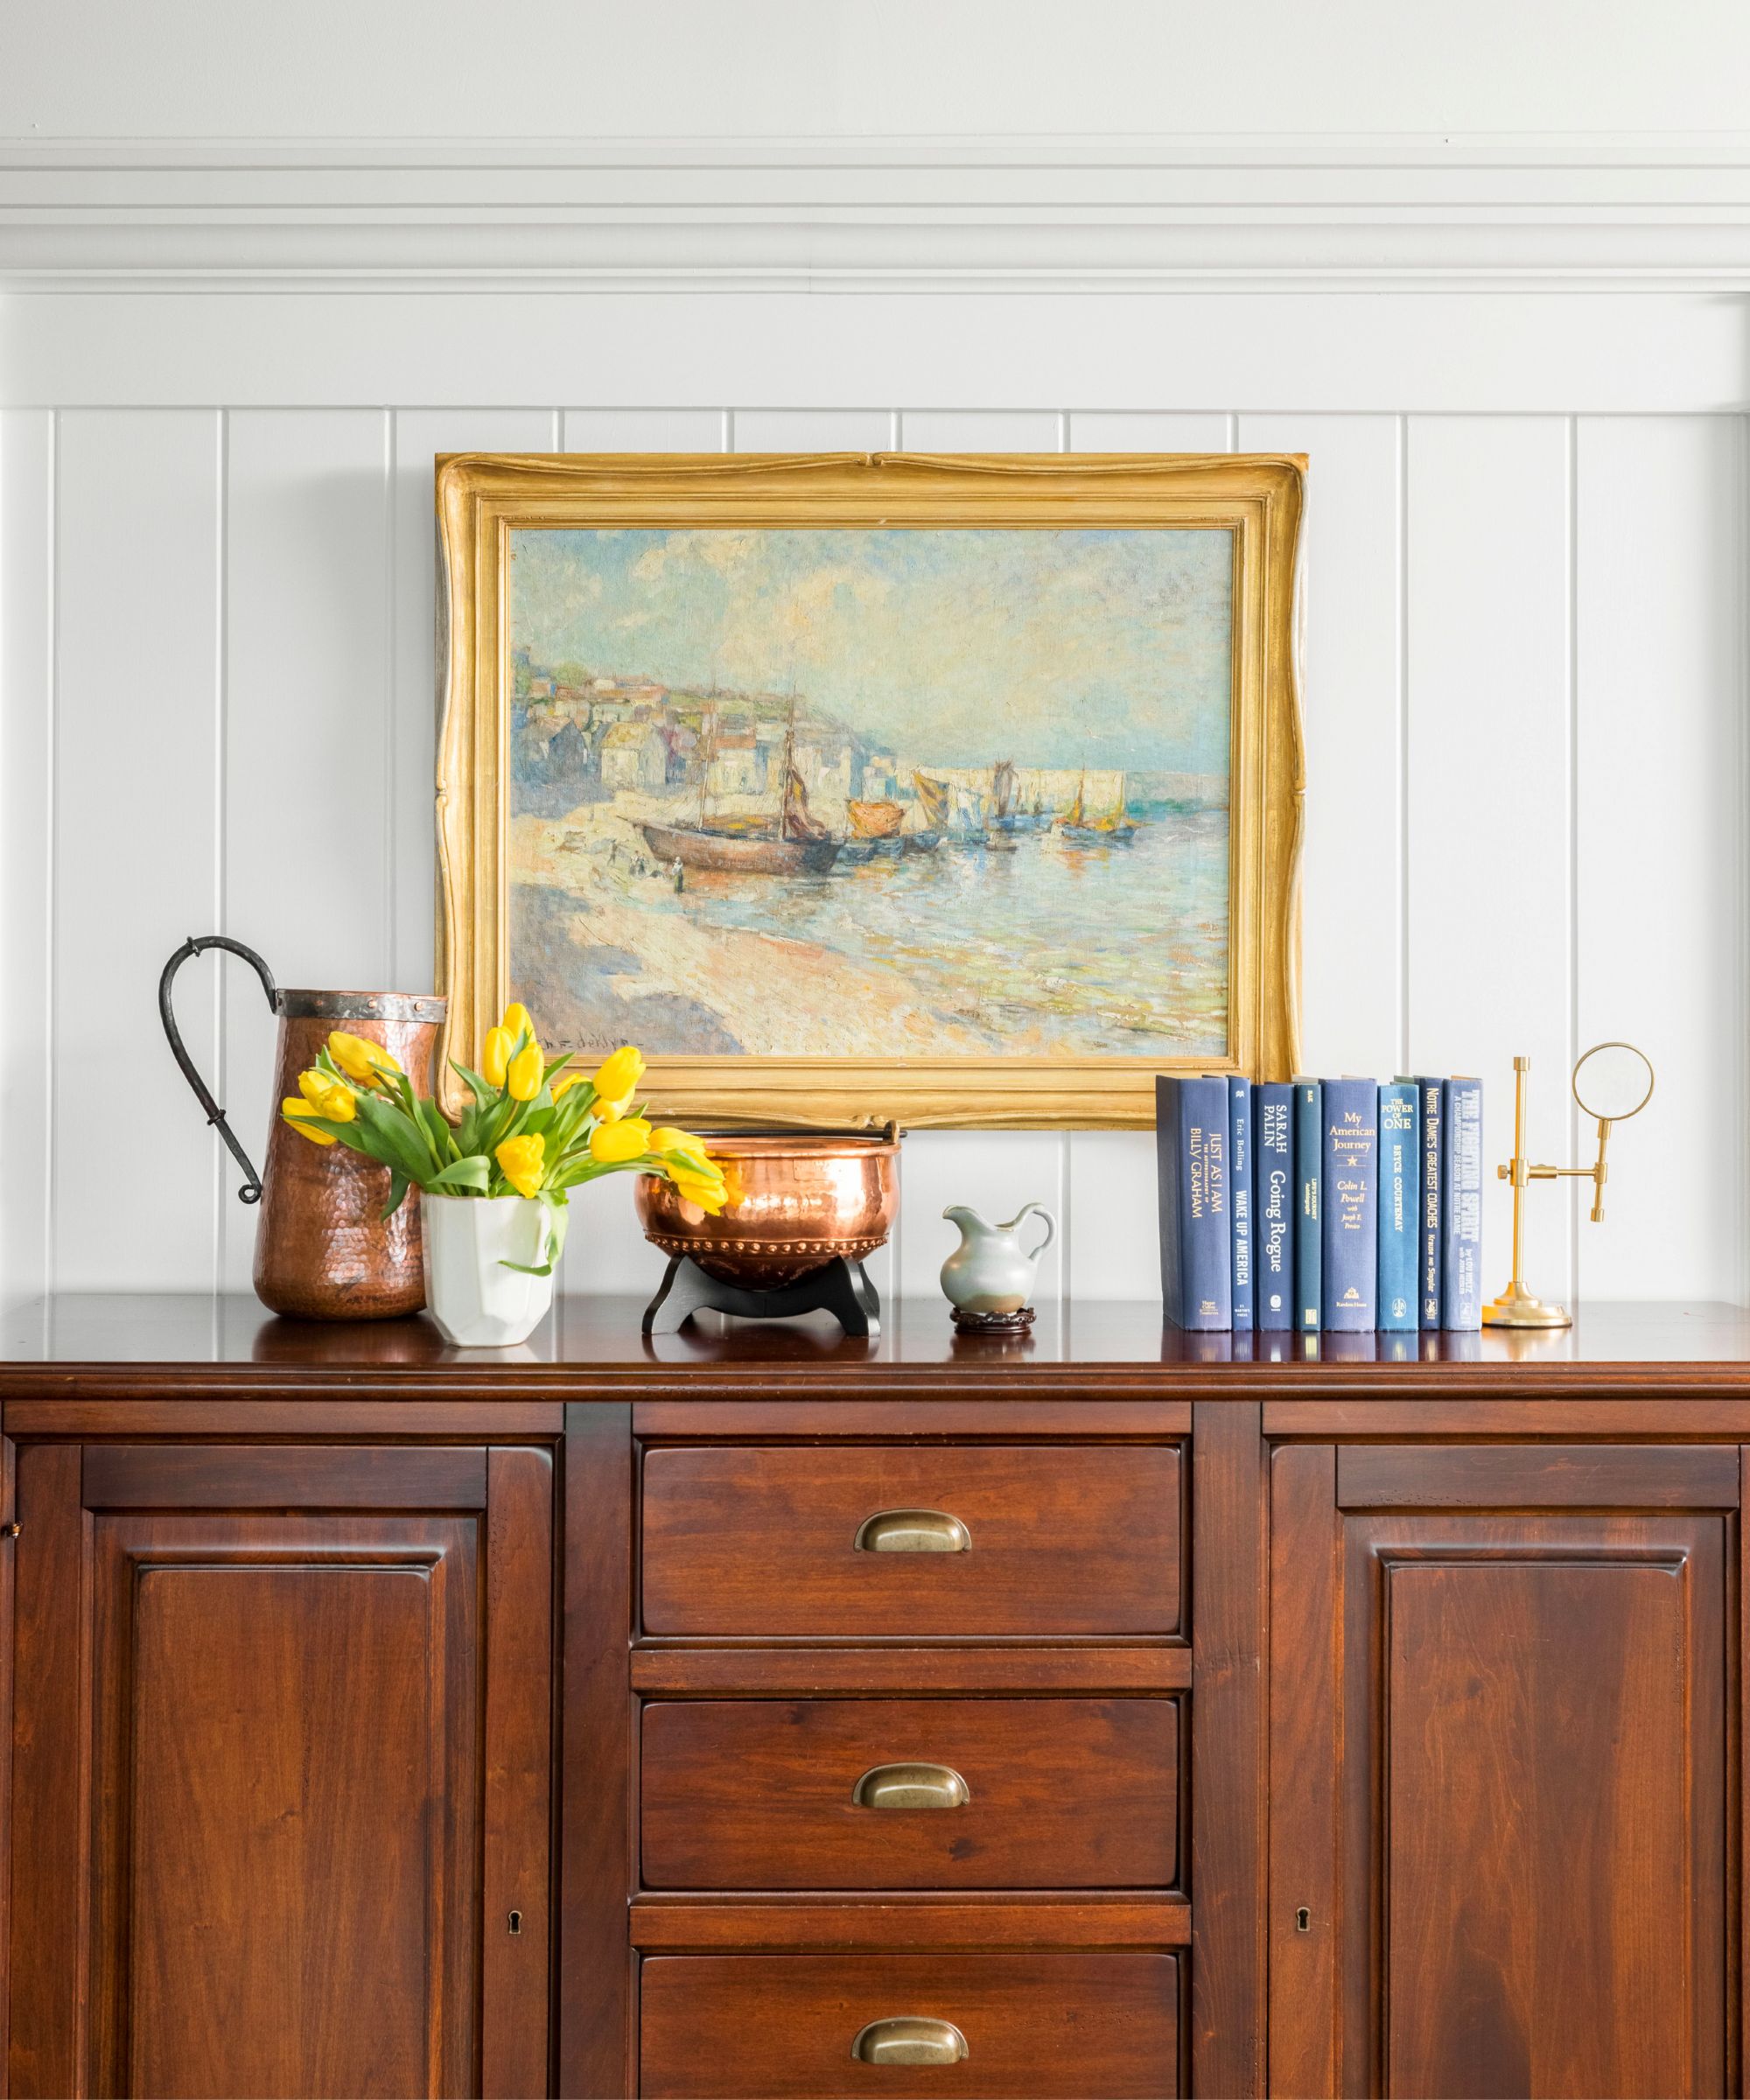 An antique dresser with flowers, books and trinkets on top, and a gold framed painting hanging above